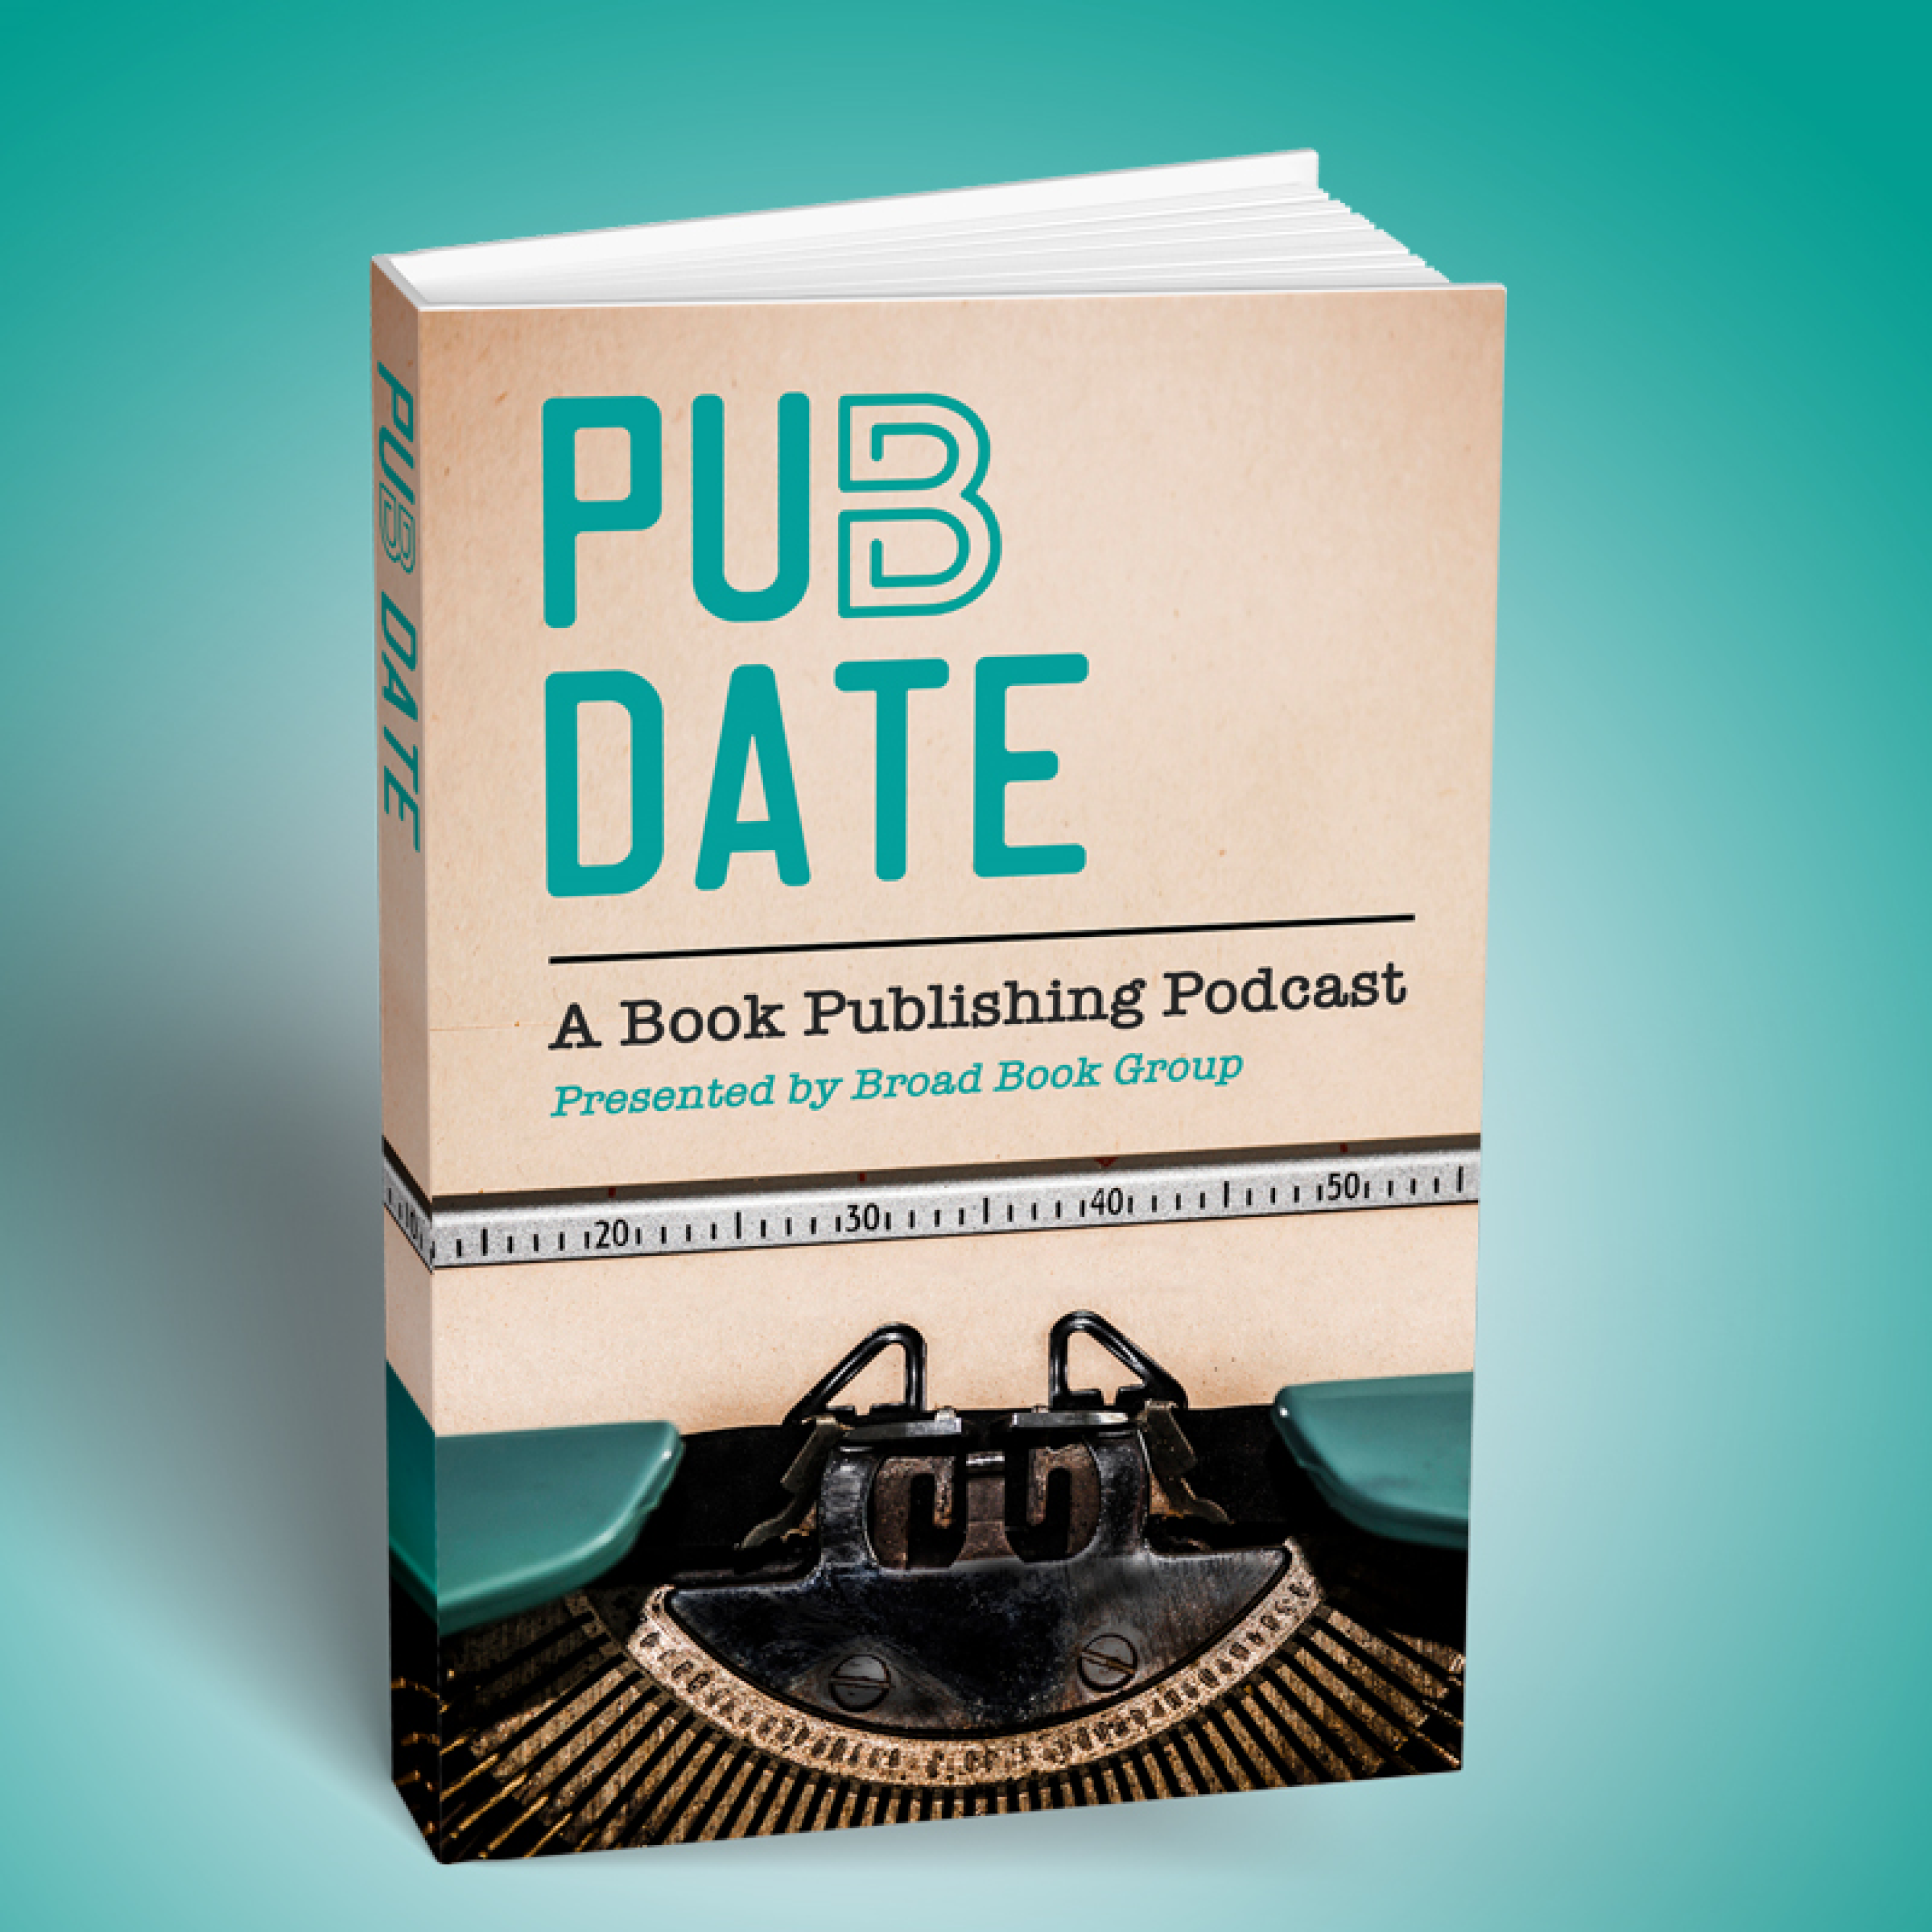 Listen to the Pub Date Podcast